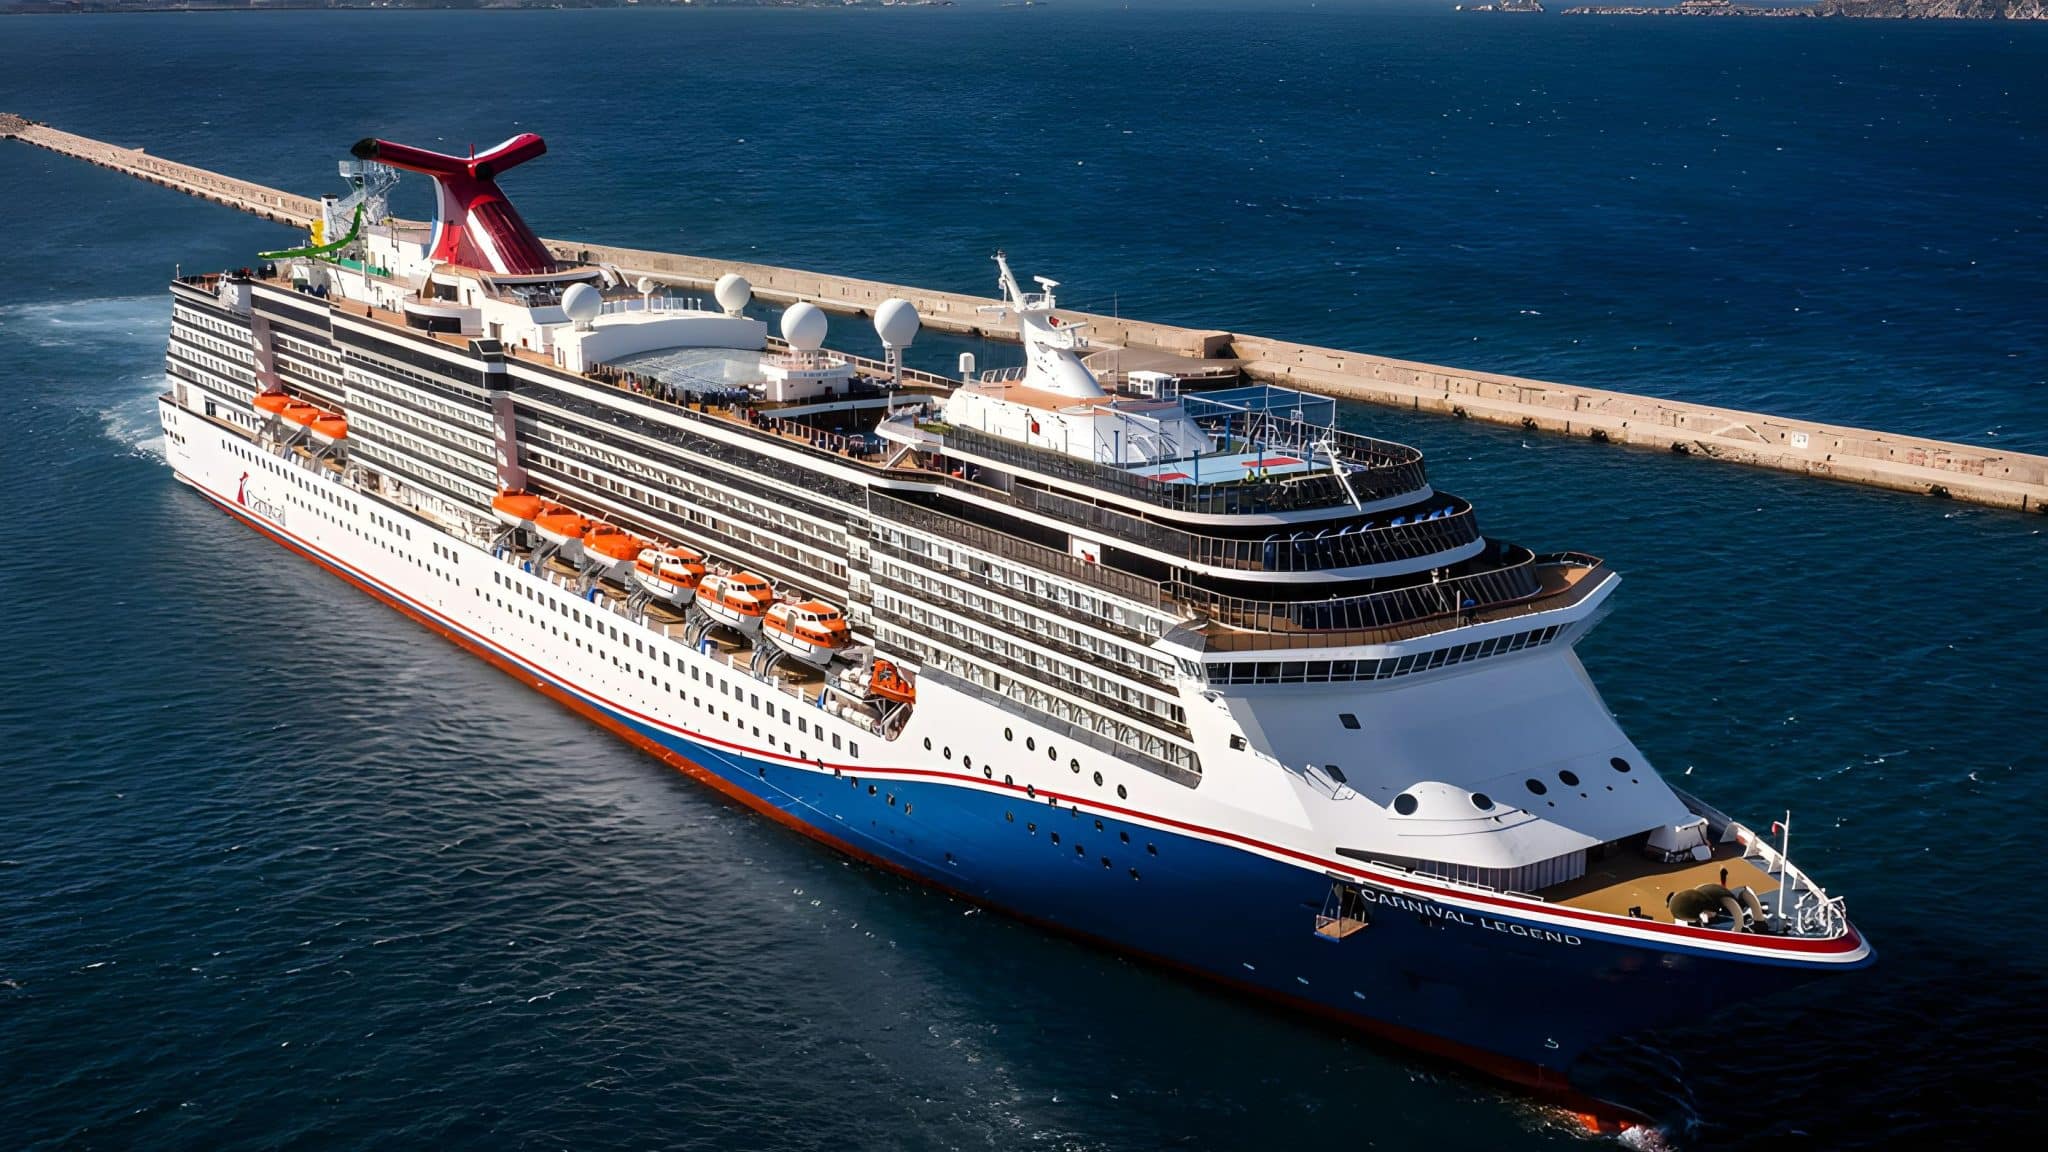 Carnival Cruise Ship Returns to Service Today With Major Enhancements